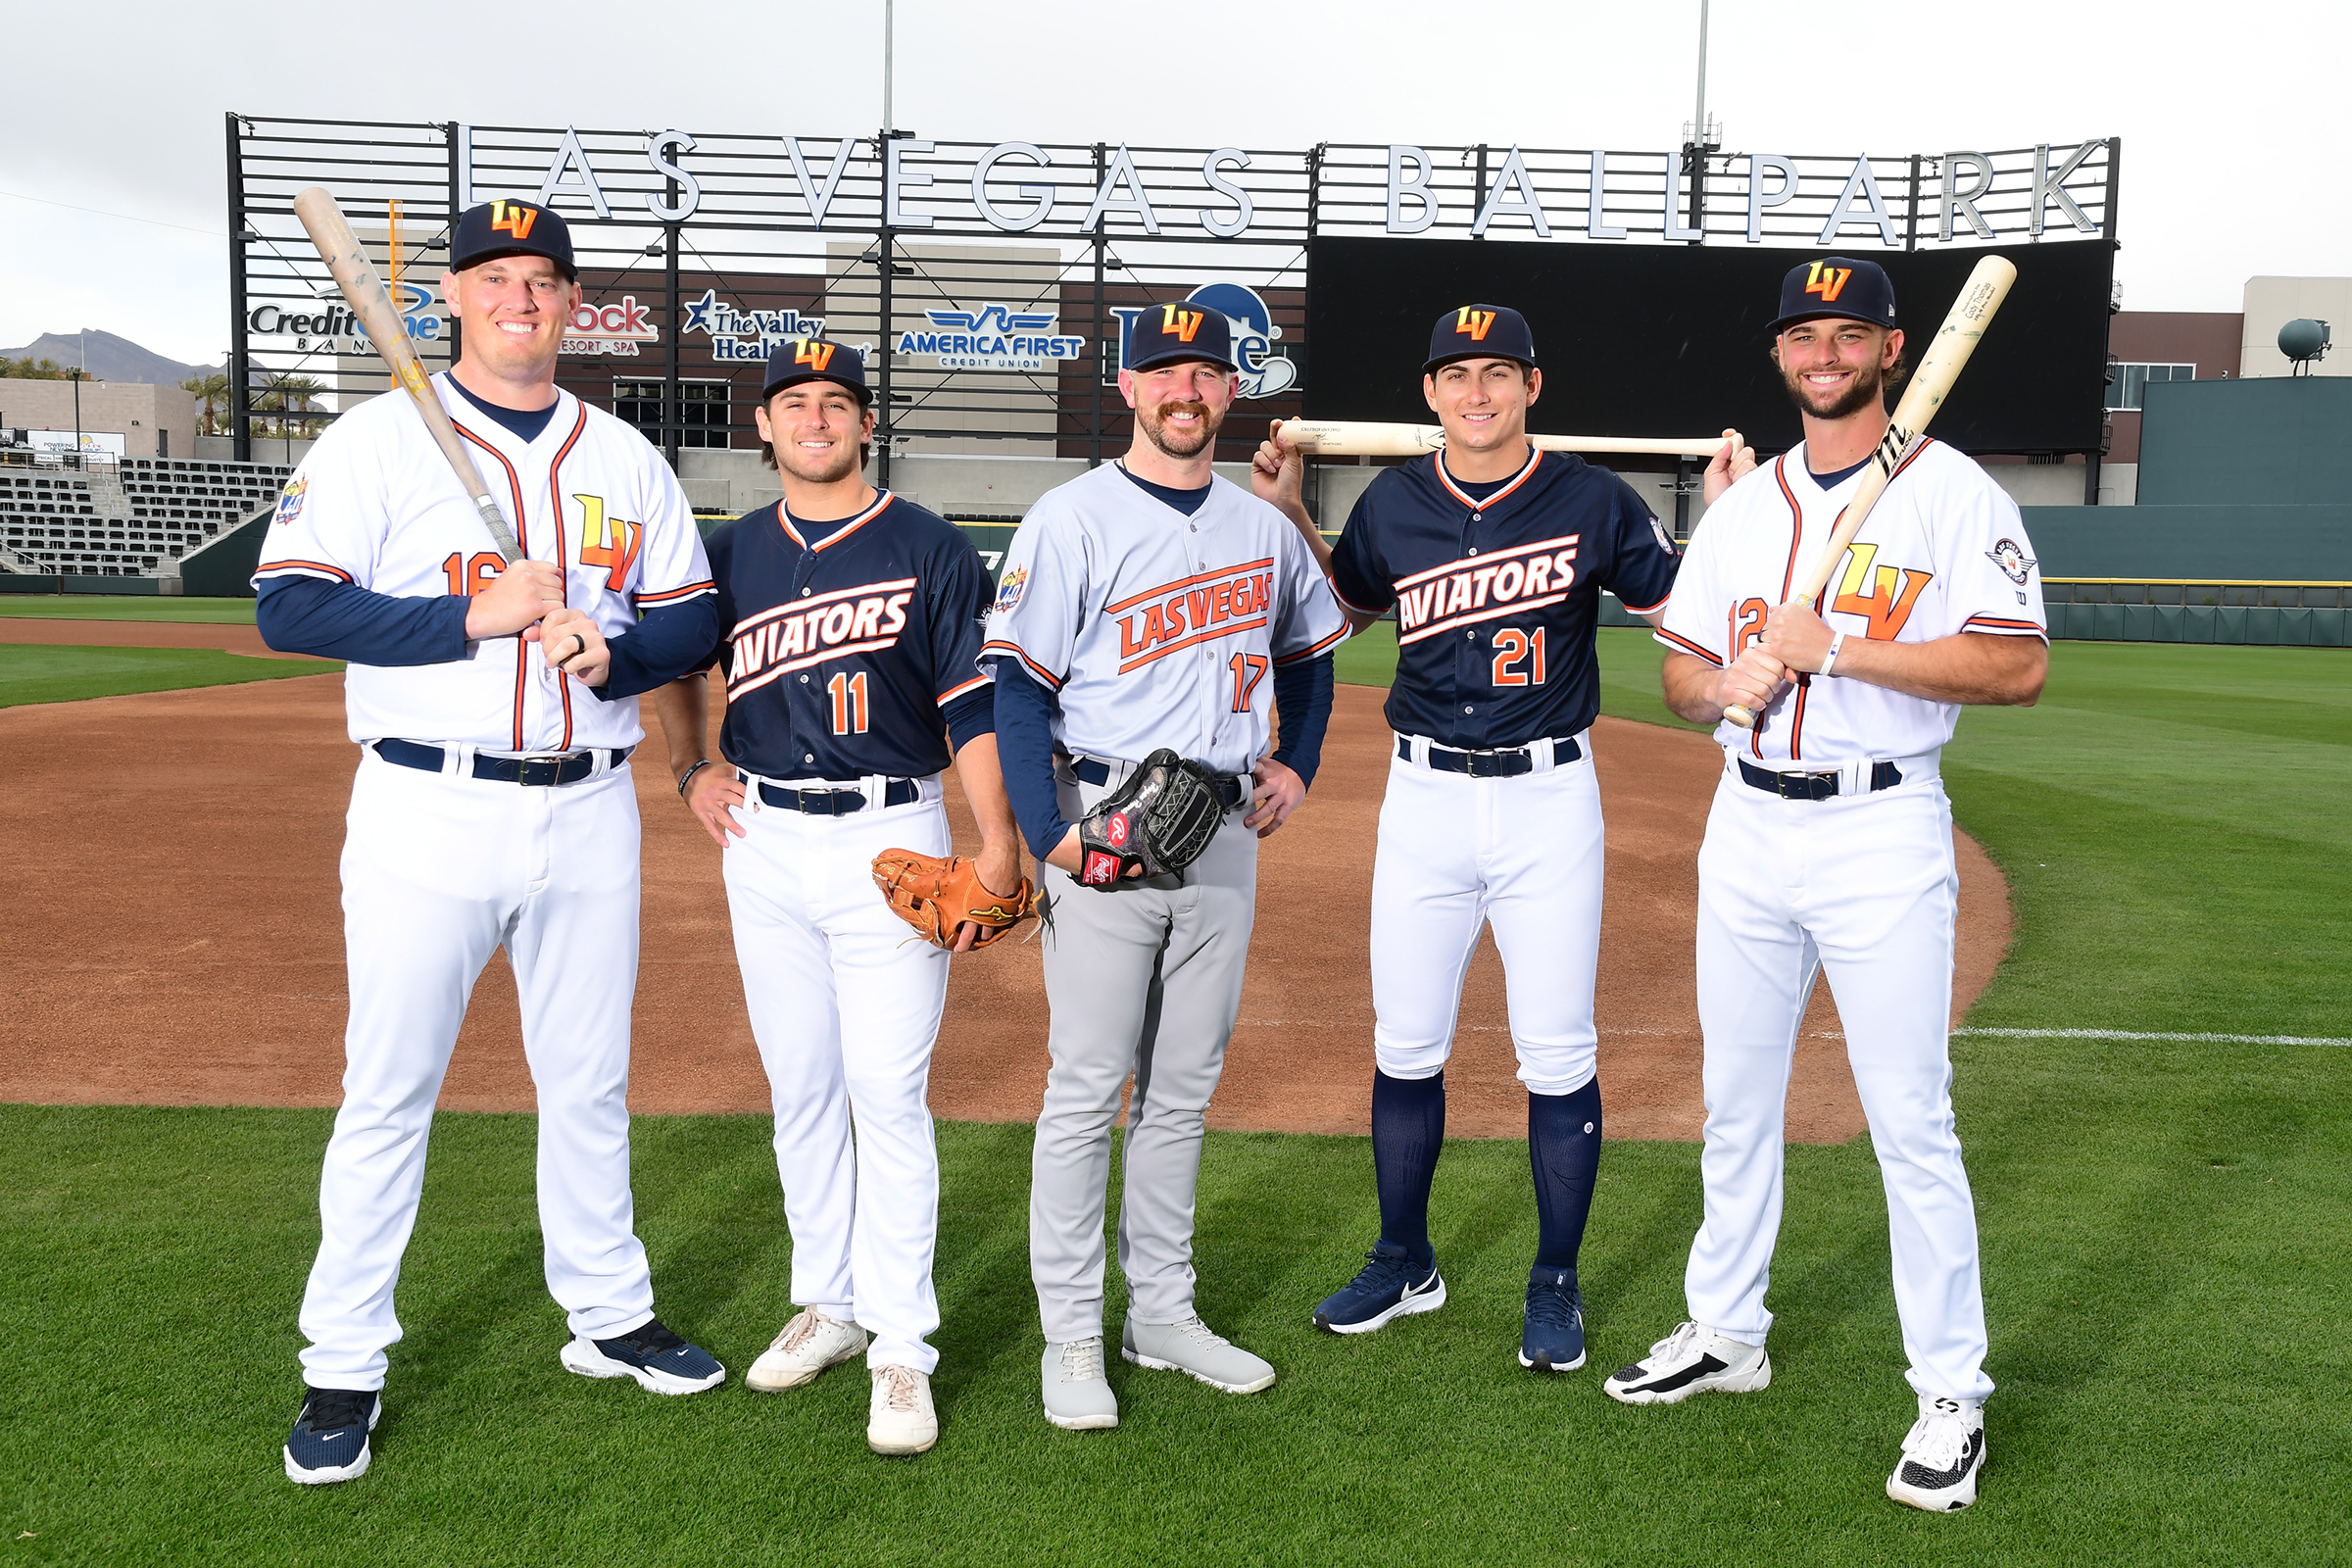 Las Vegas Aviators on X: New year. New threads 🔥 The Las Vegas Aviators  will debut their new on-field jerseys for the 2023 season on March 31 at  Reno. These new looks